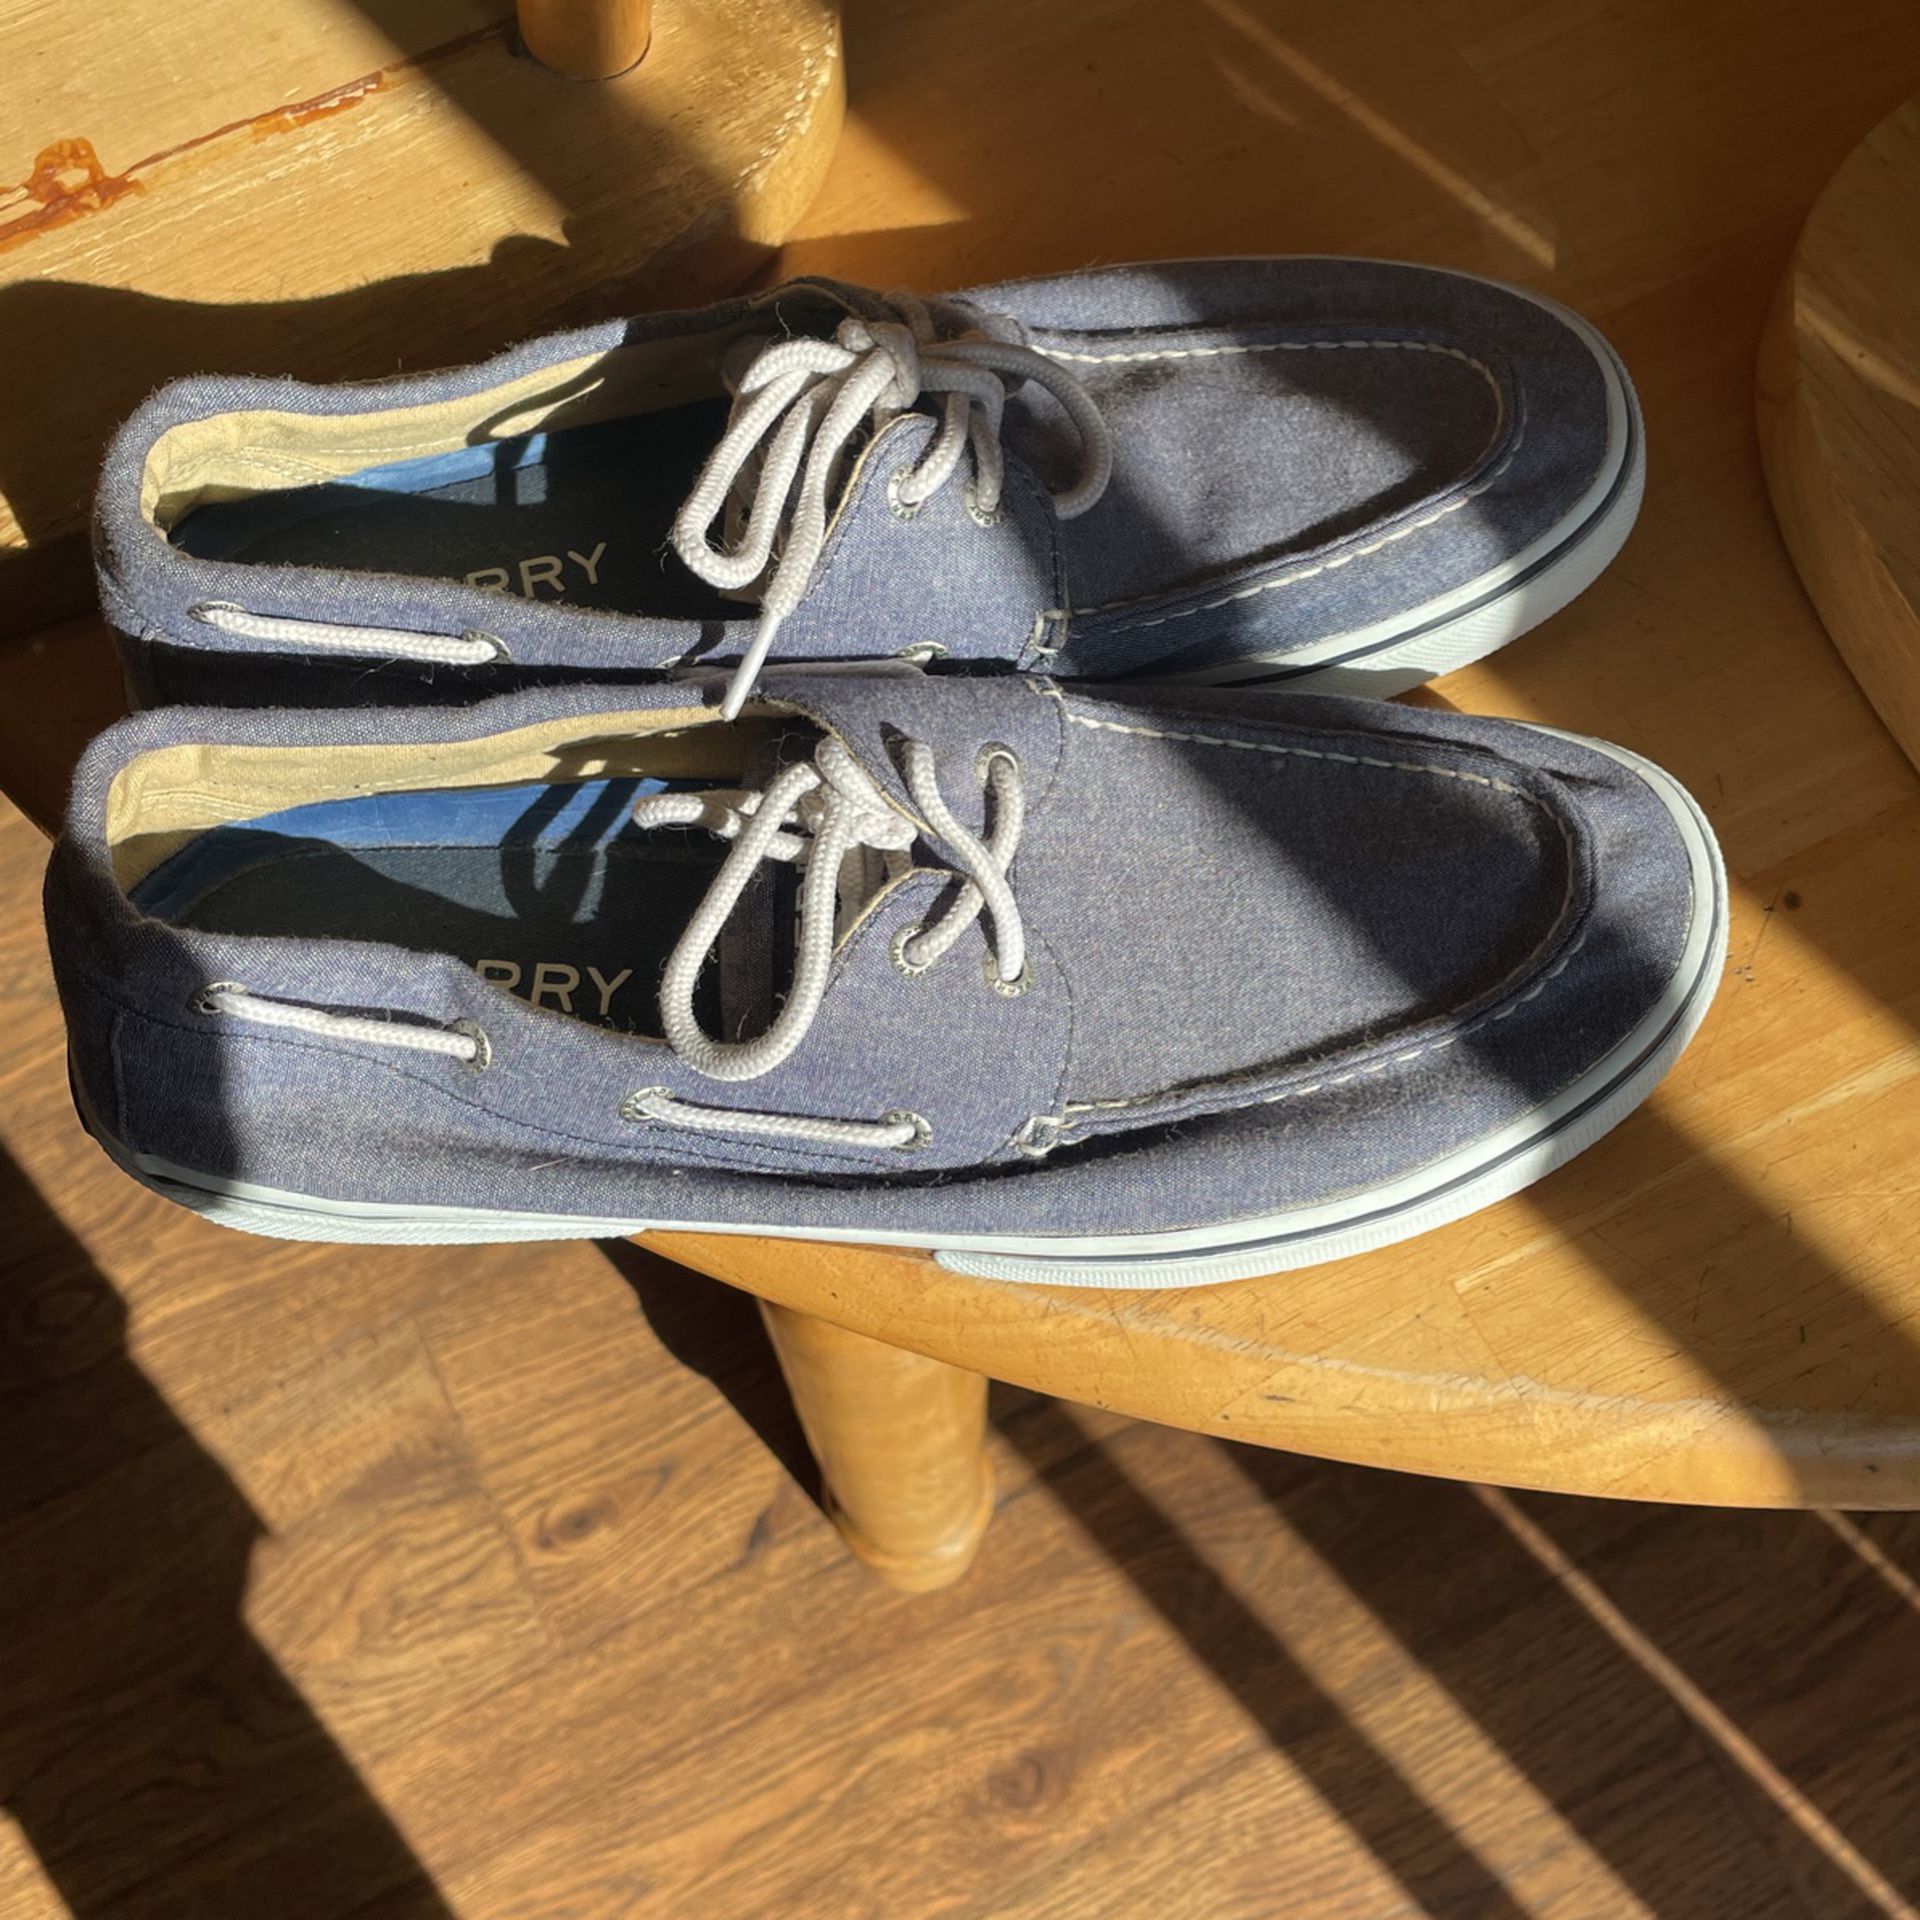 SperryI only wear one time size 11 good condition